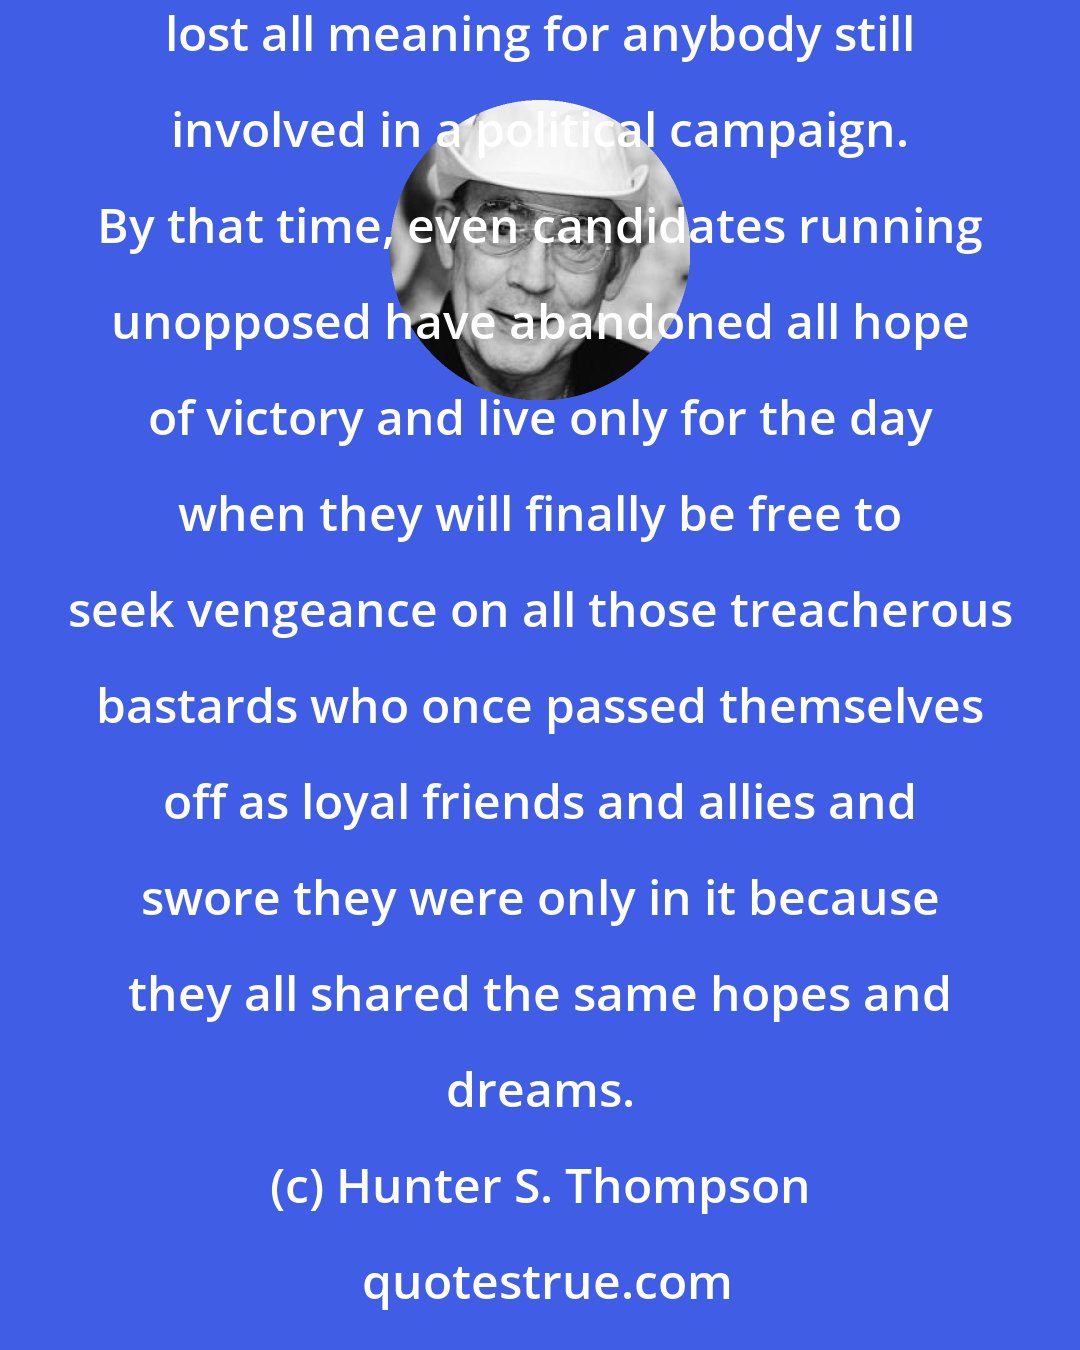 Hunter S. Thompson: October is the cruelest month of any election year, but by then, the pain is so great that even the strong are like jelly and time has lost all meaning for anybody still involved in a political campaign. By that time, even candidates running unopposed have abandoned all hope of victory and live only for the day when they will finally be free to seek vengeance on all those treacherous bastards who once passed themselves off as loyal friends and allies and swore they were only in it because they all shared the same hopes and dreams.